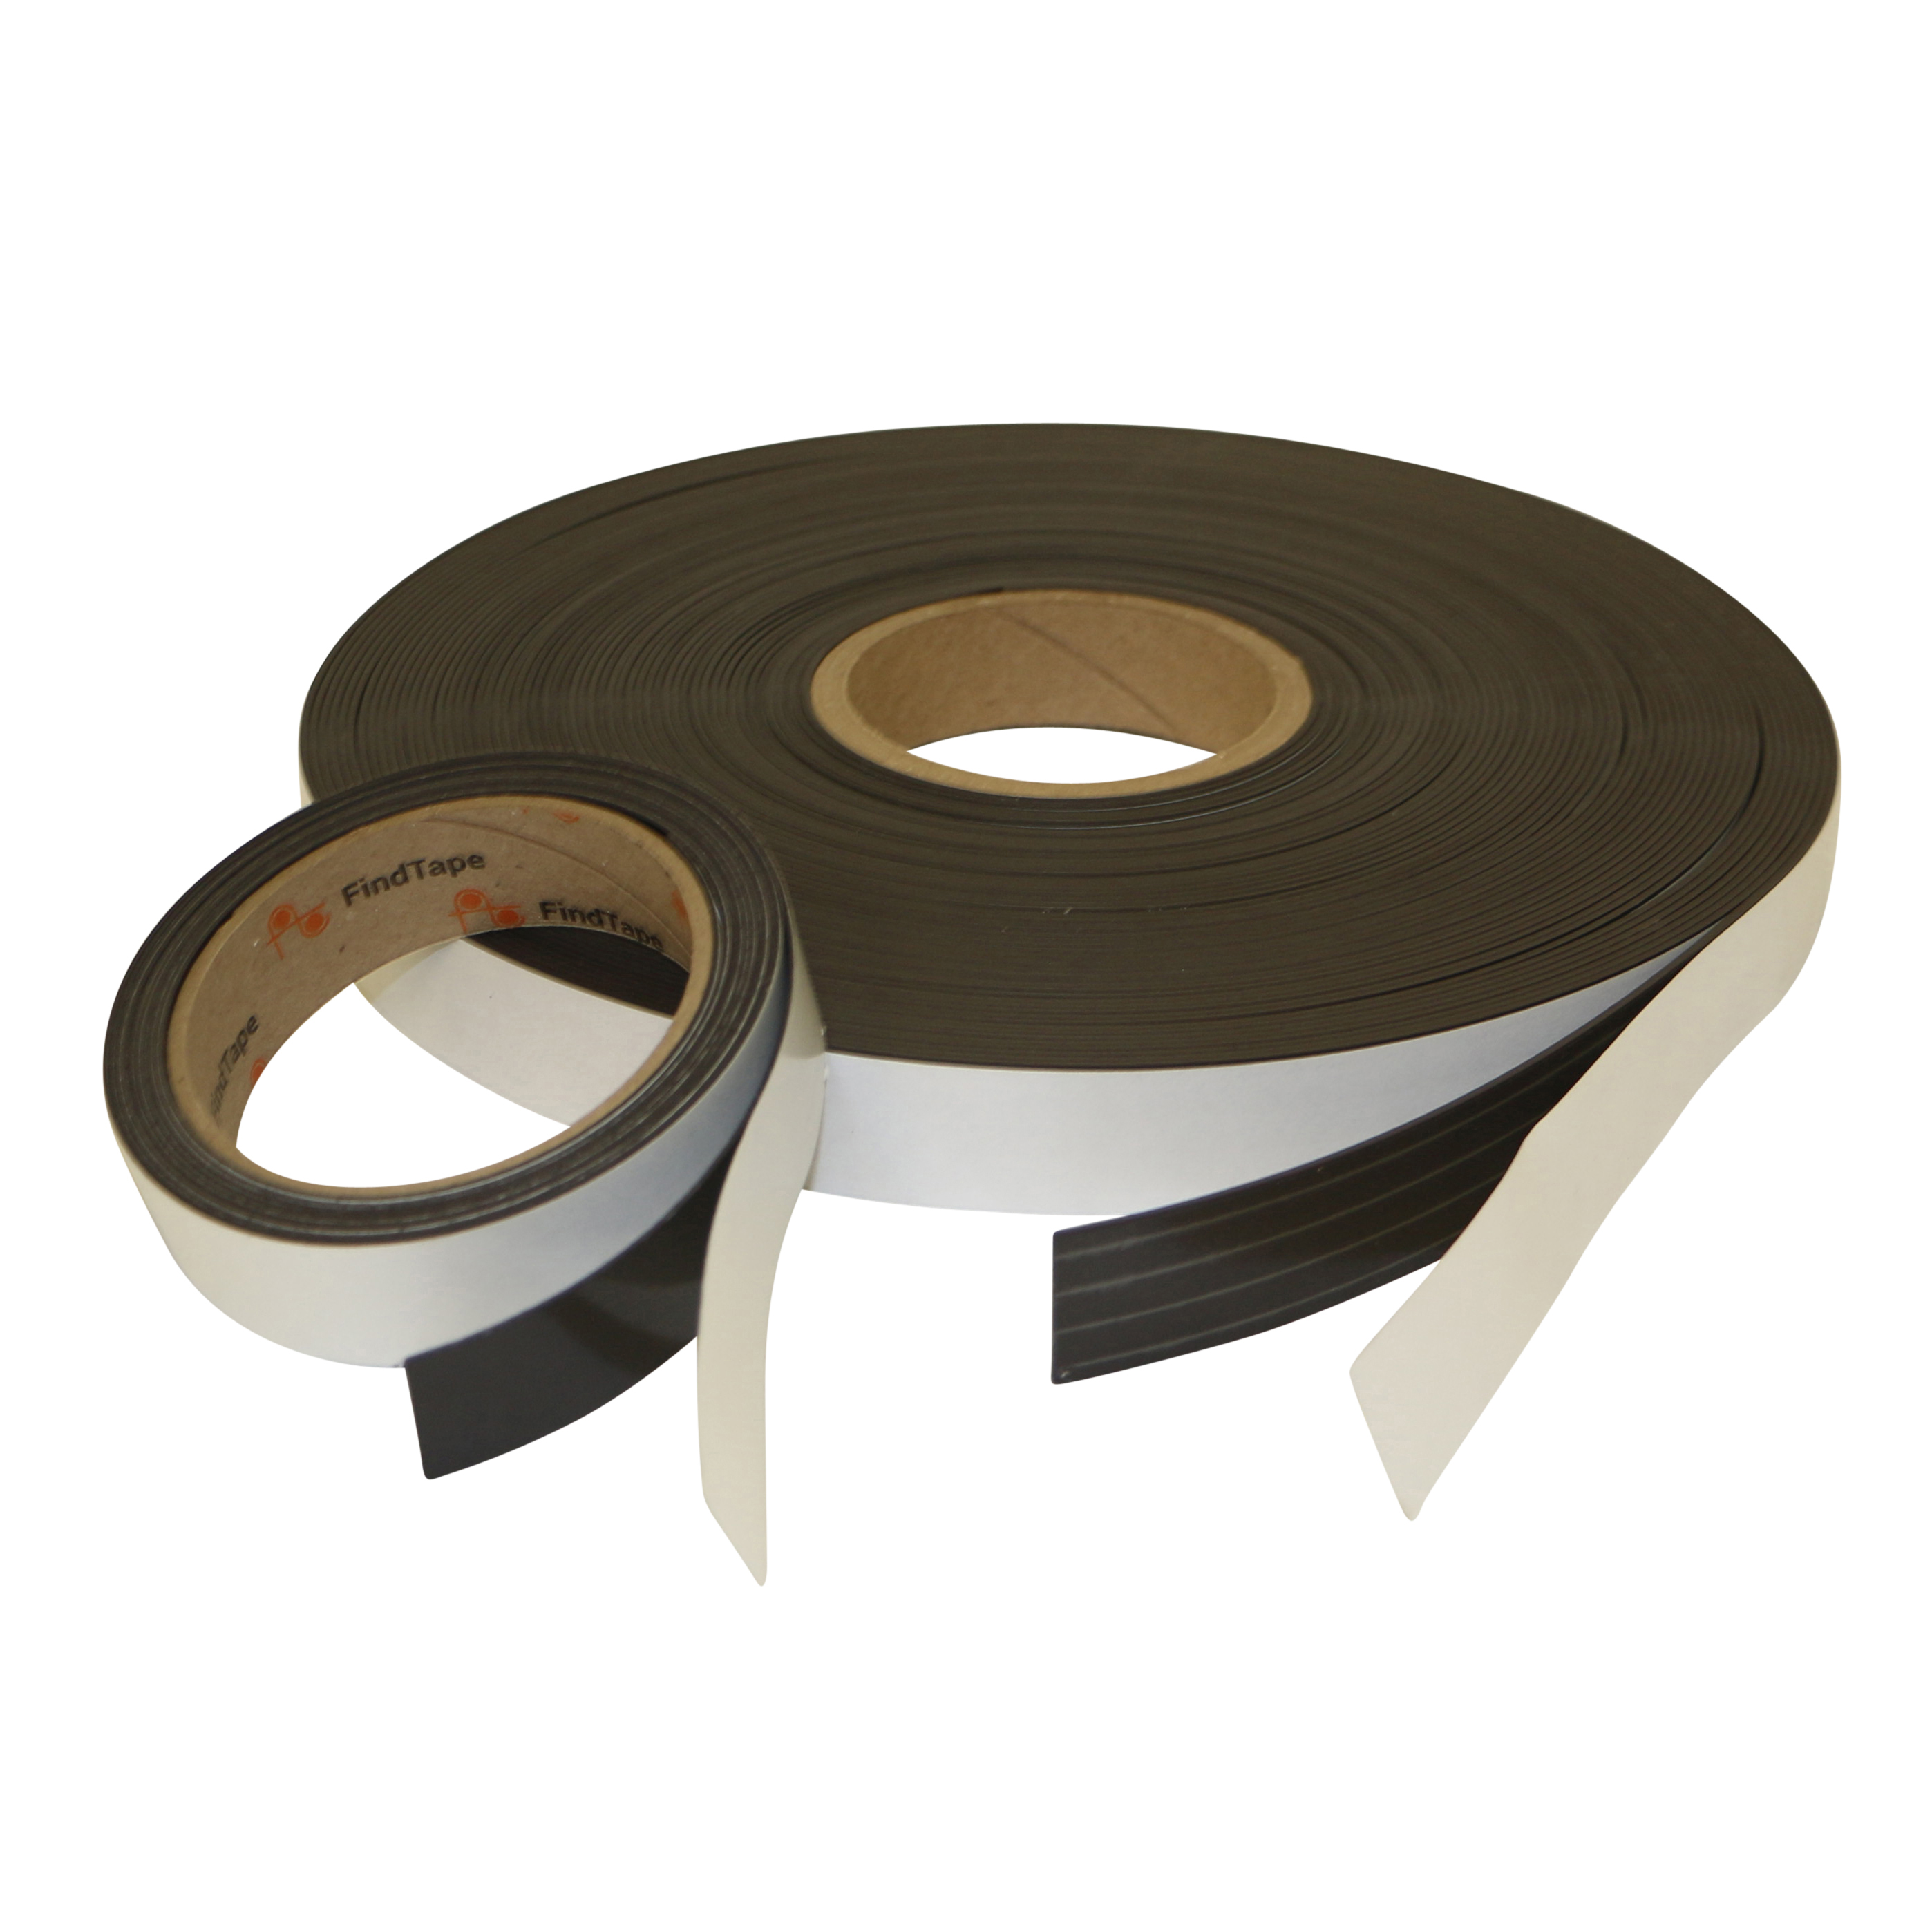 / outdoor-grade Black FindTape MGRS Receptive Steel Tape: 1/2 in x 10 ft. 